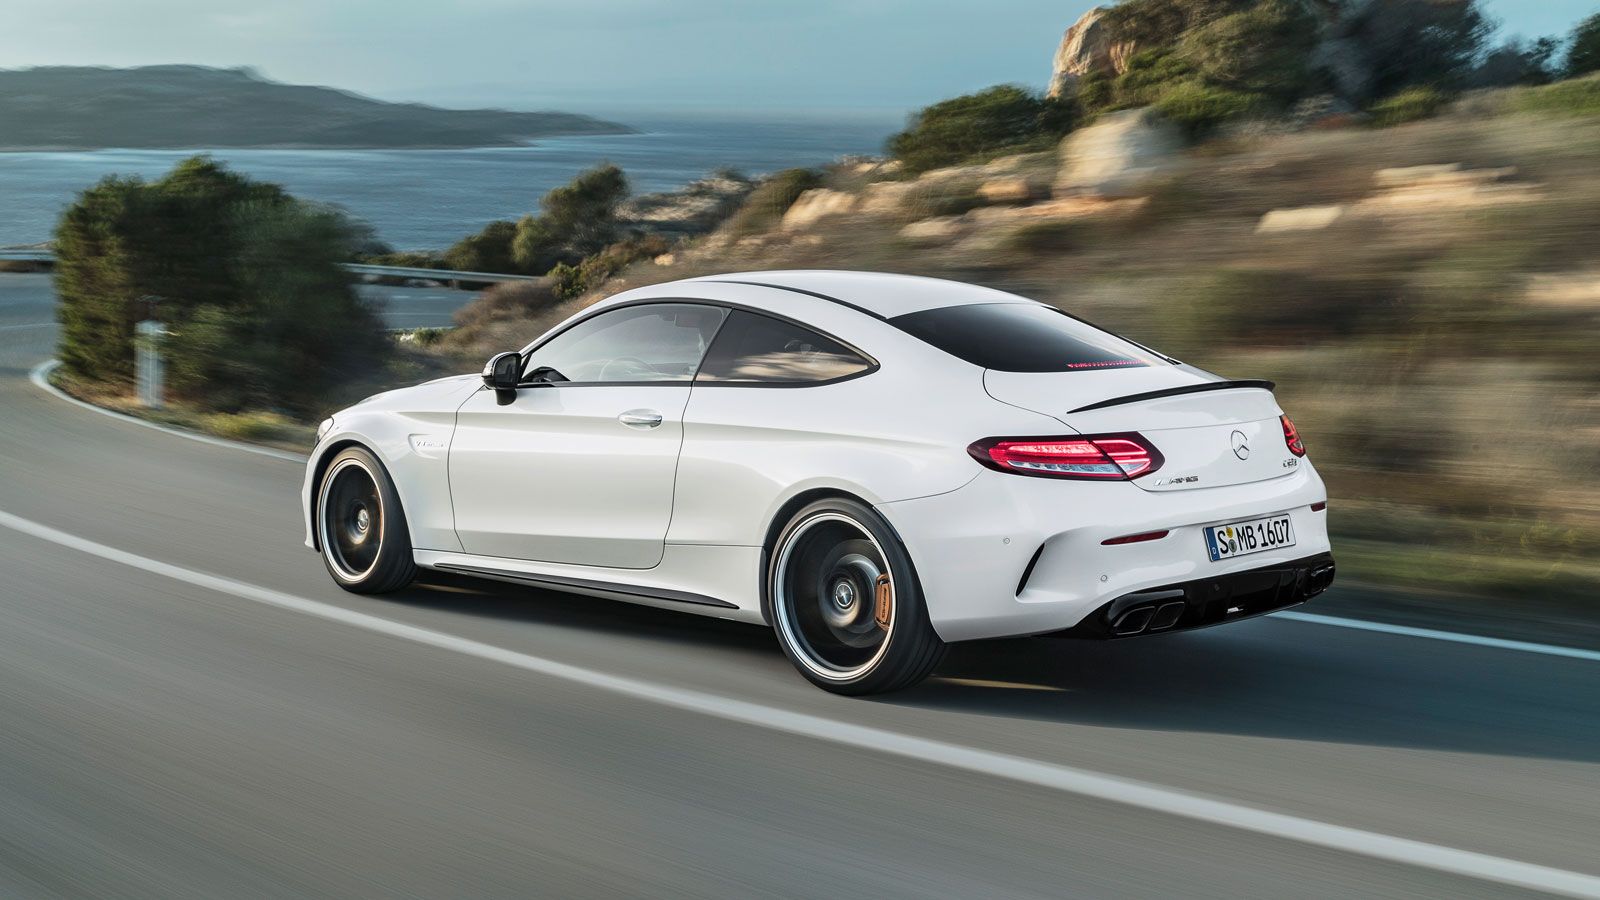 The 2019 Mercedes-AMG C63 and C63 S are here